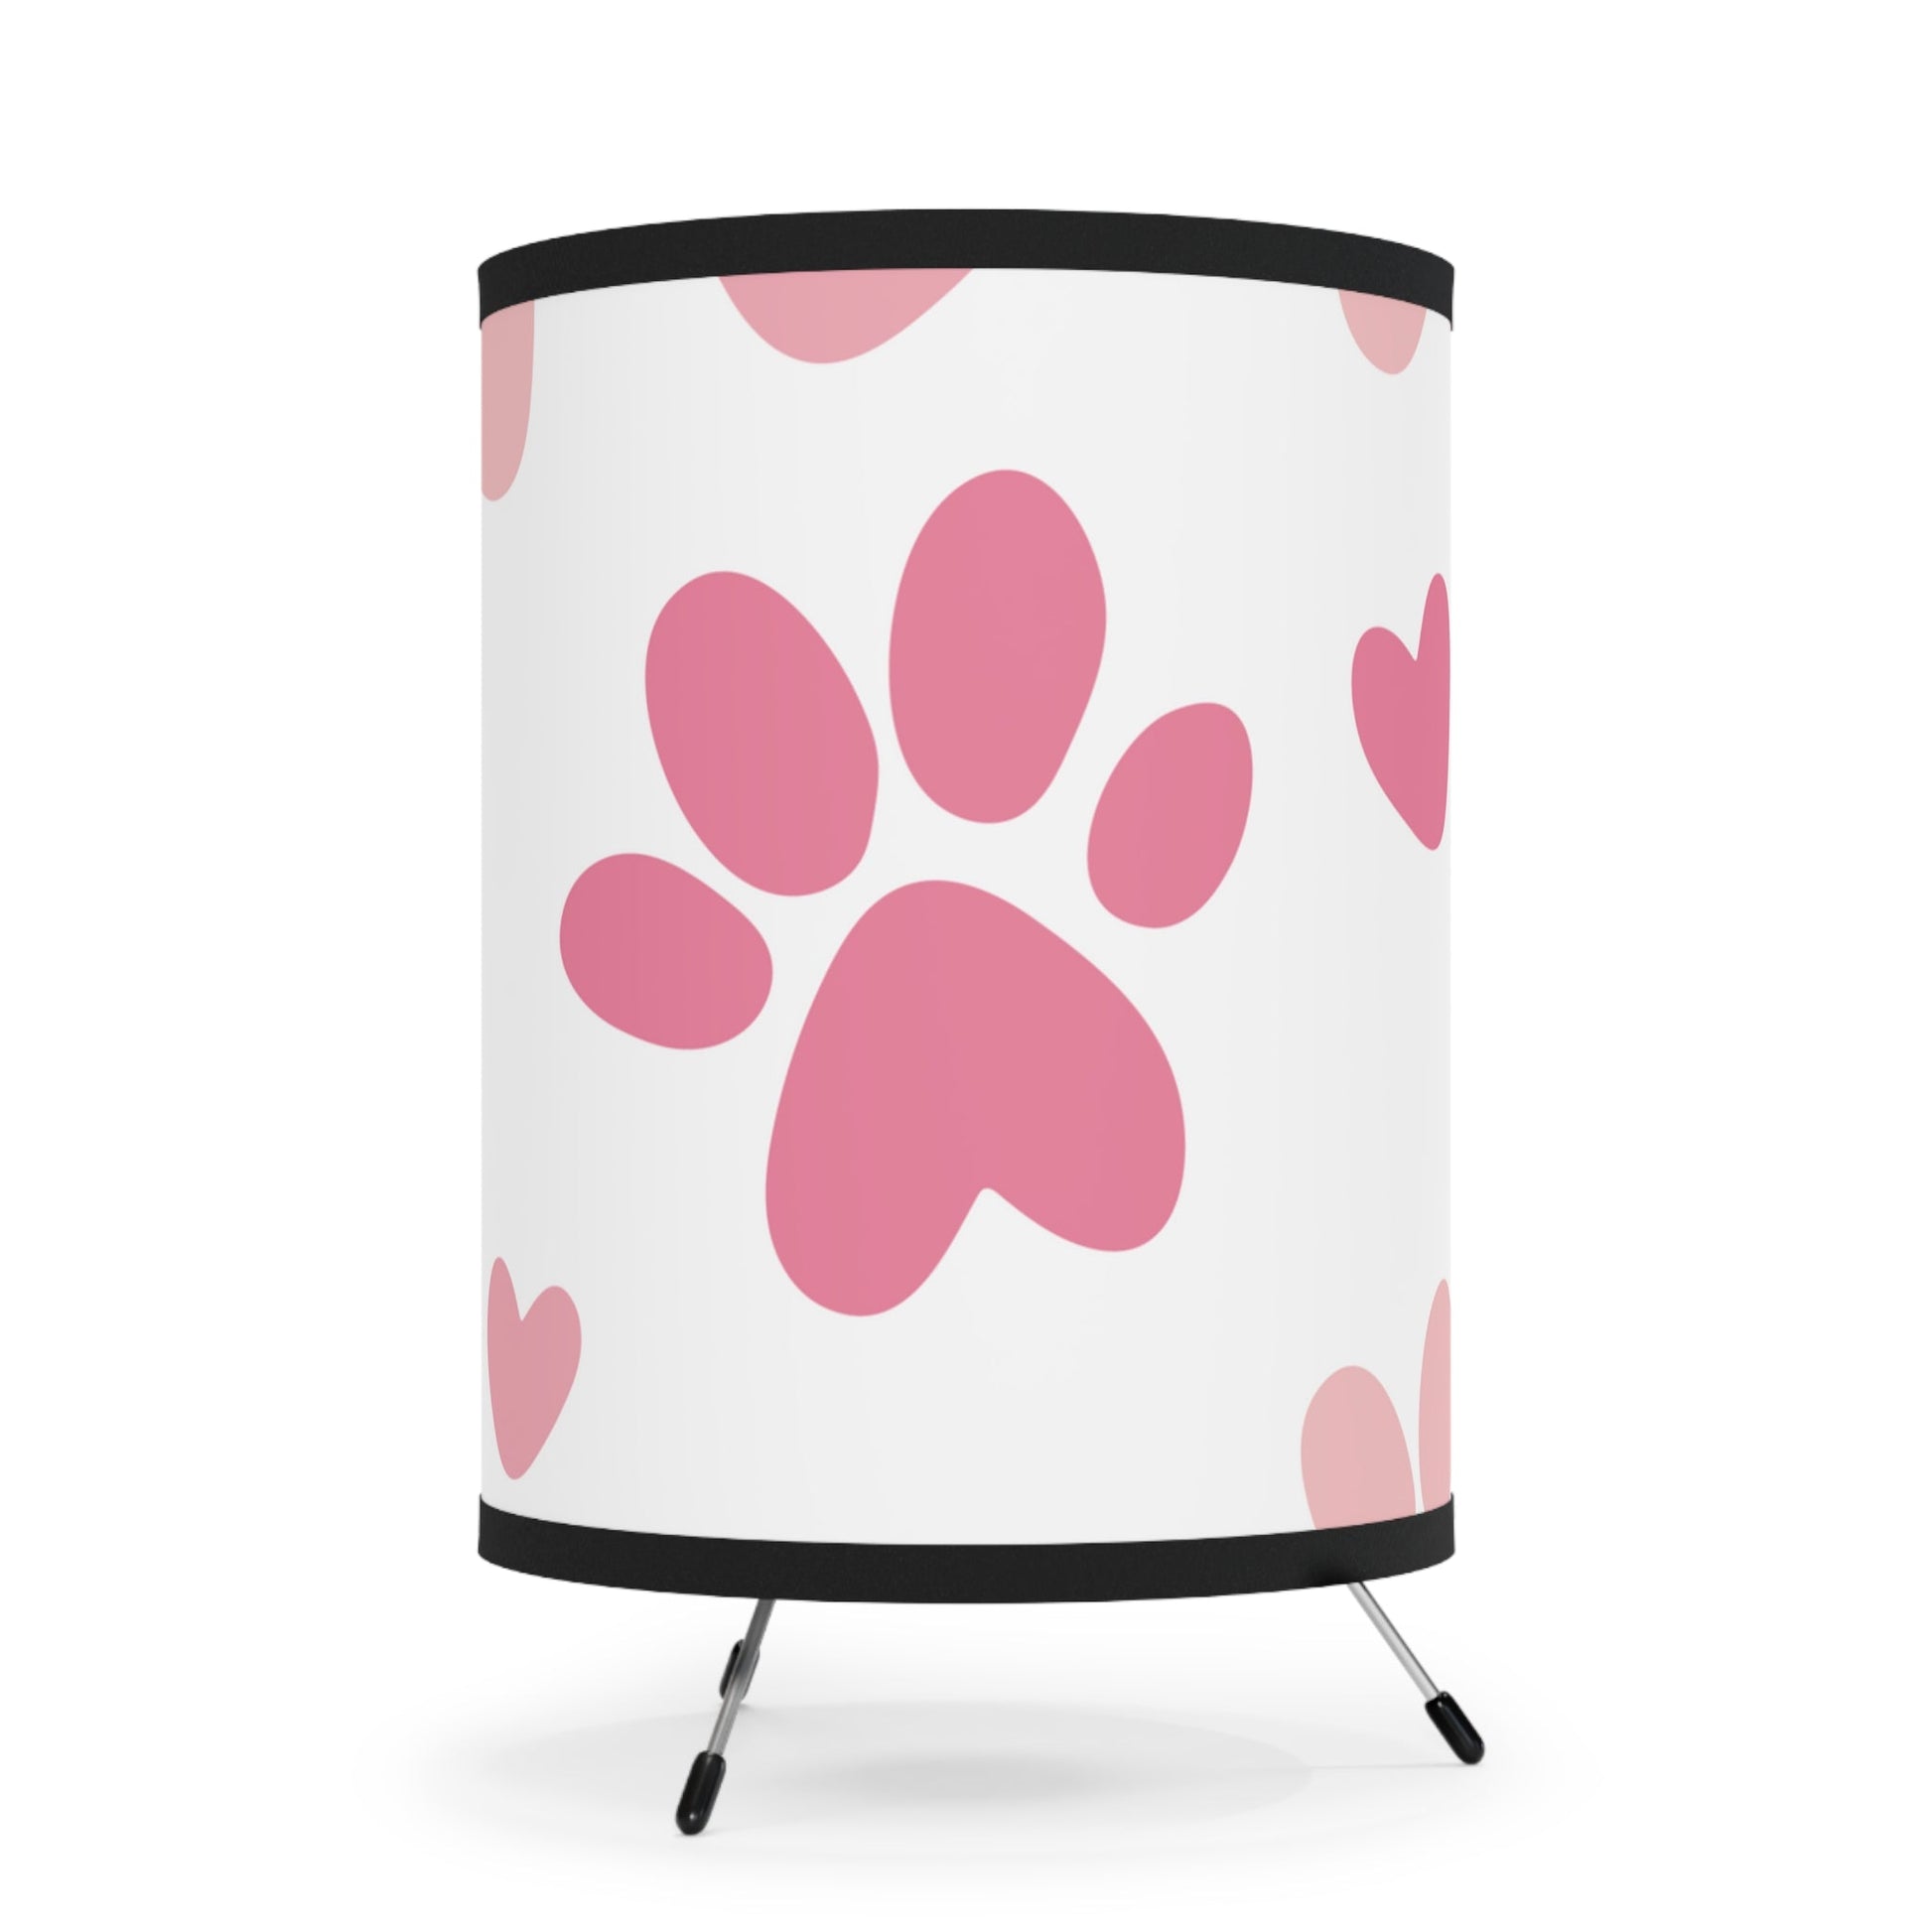 Cat Paw Tripod Lamp with High - Res Printed Shade, US\CA plug - Home Decor - Epileptic Al’s Shop